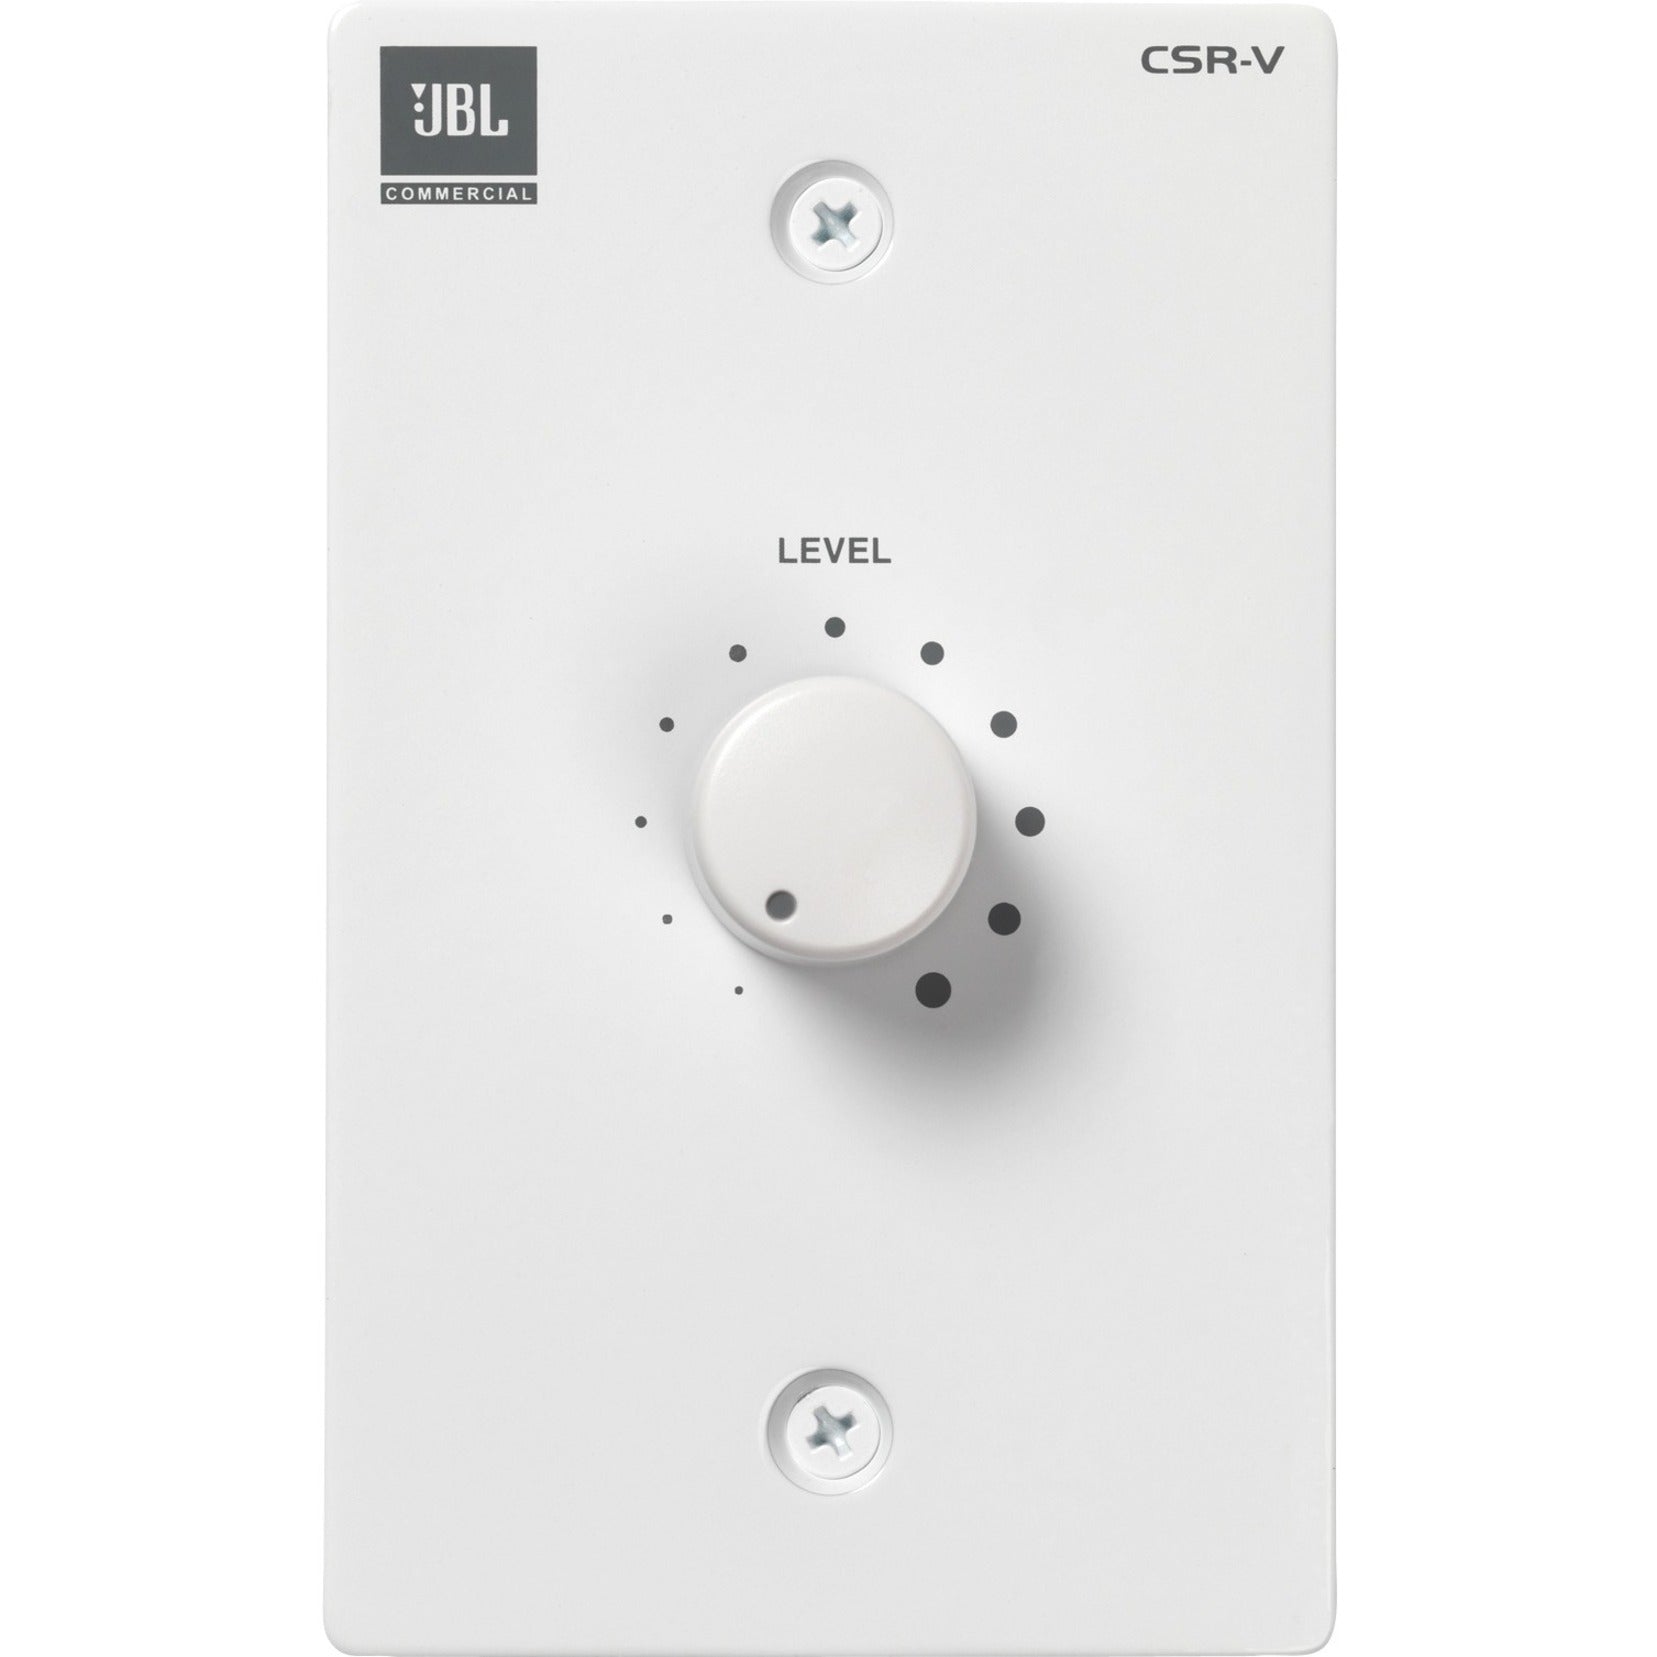 JBL Commercial JBLCSRVWHTV CSR-V Audio Control Device, Wired Wall Mountable Gang Box Mount, White